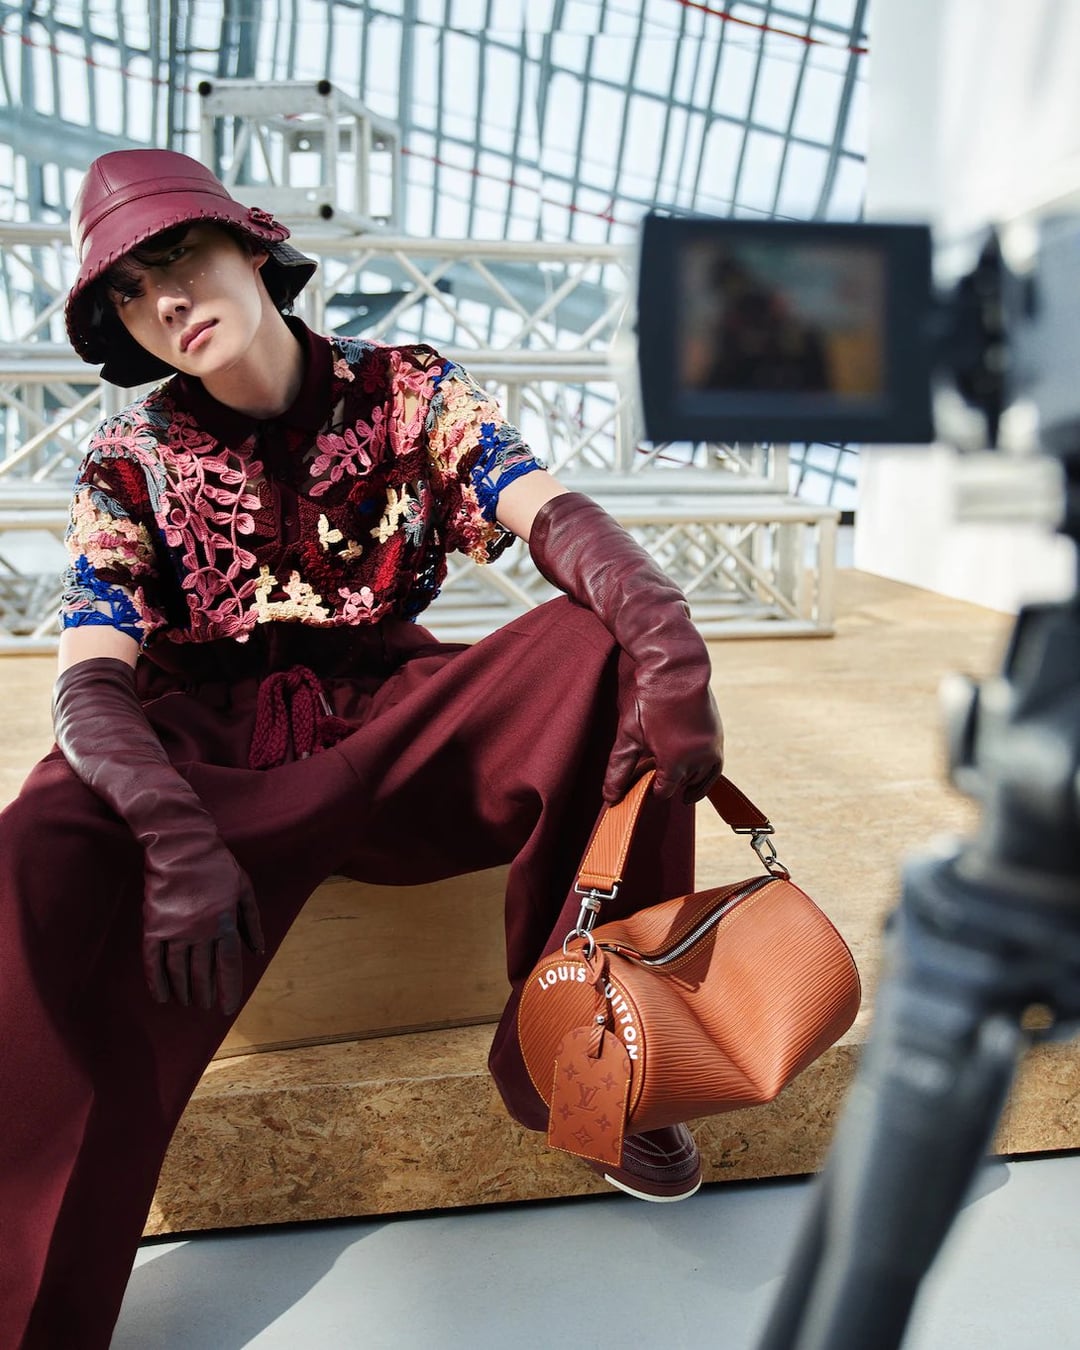 [Louis Vuitton] New images from j-hope x Louis Vuitton - 130723